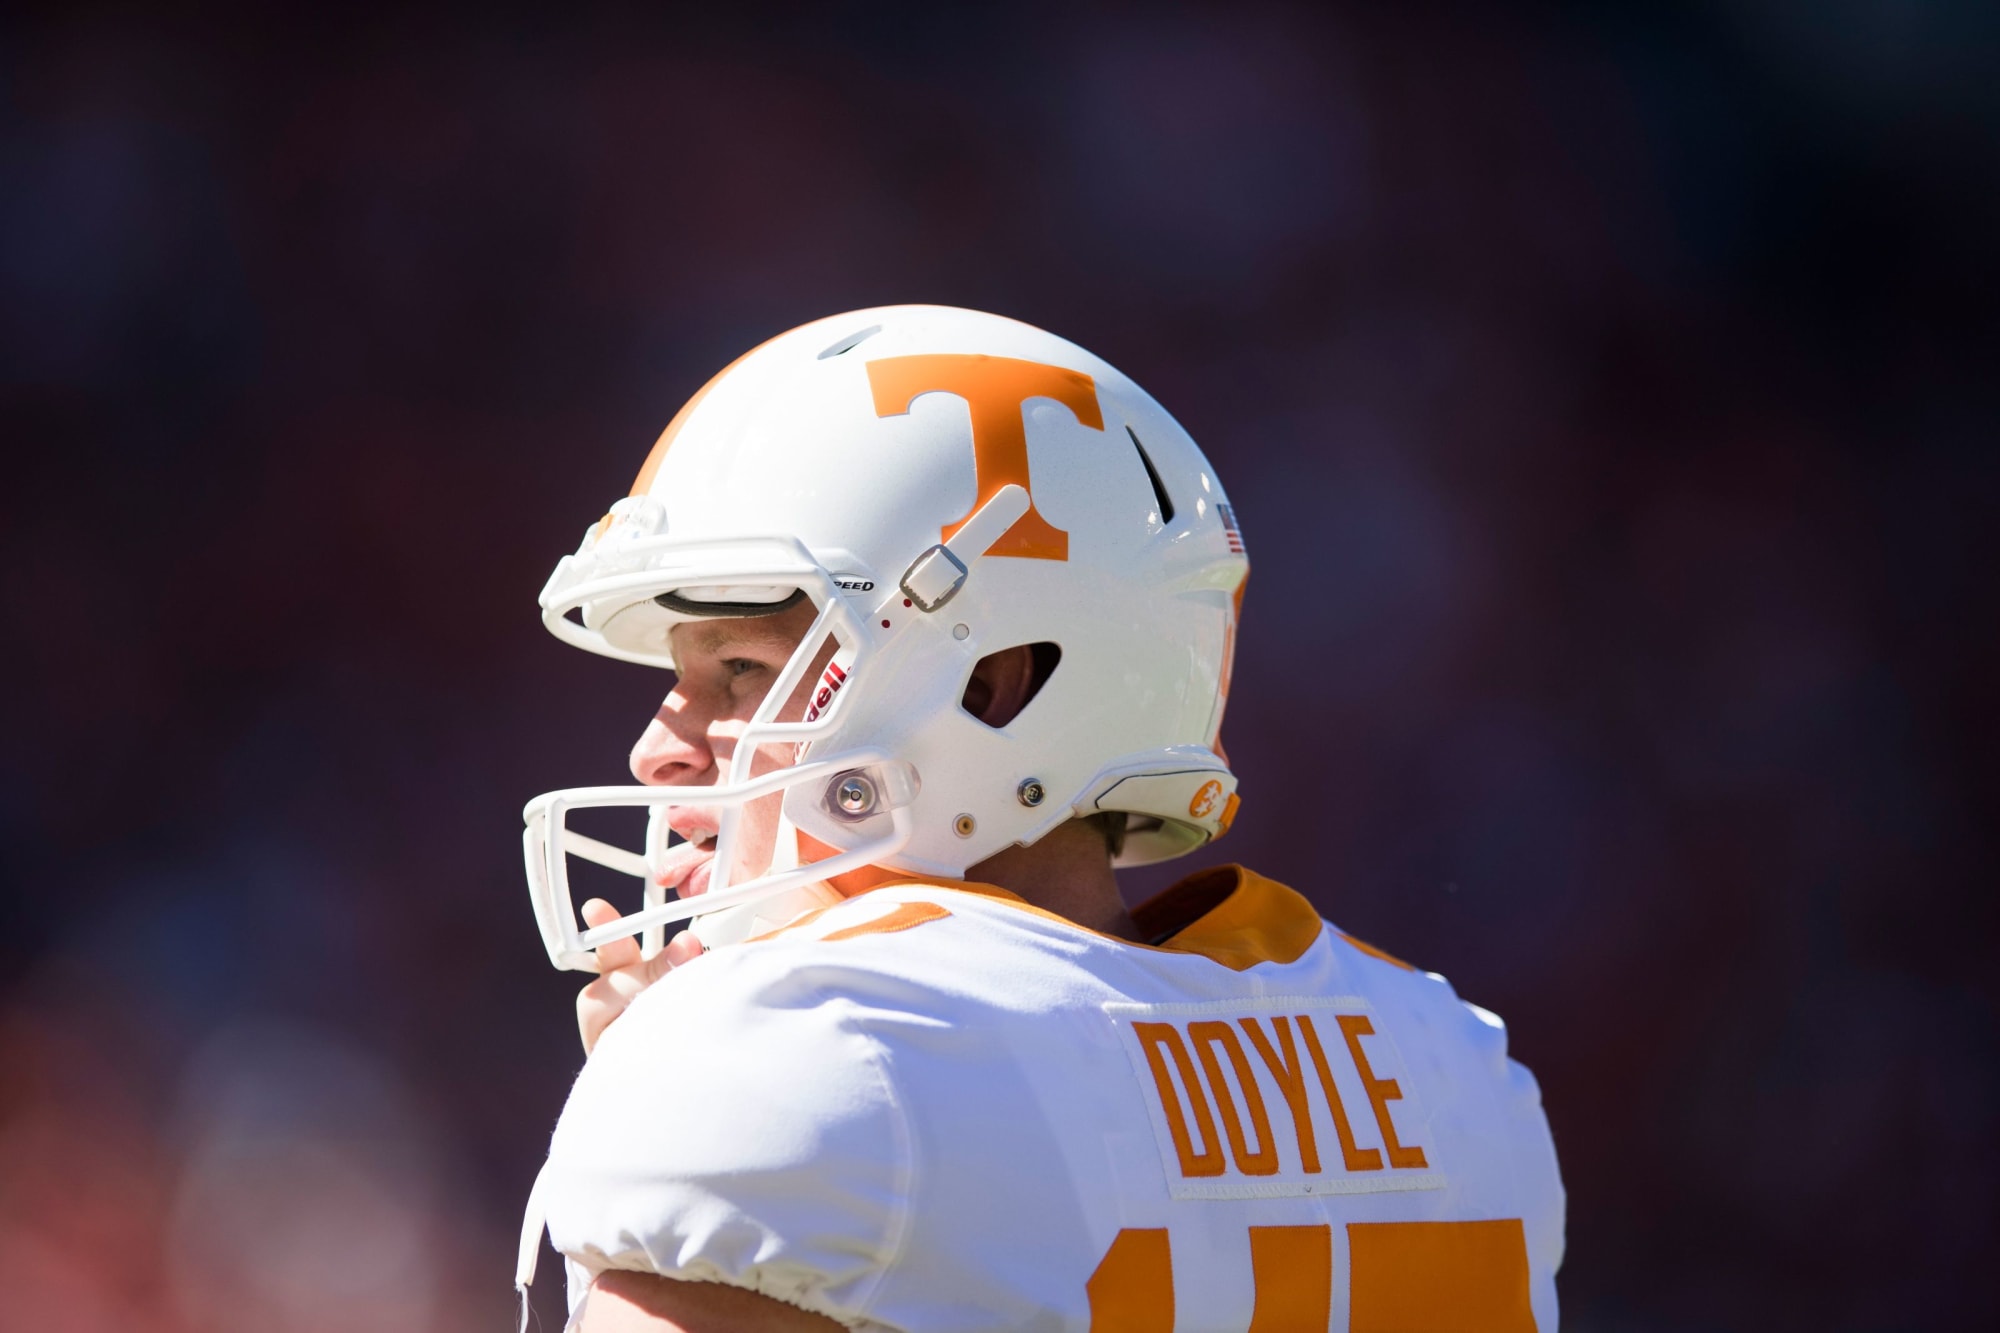 Tennessee football: Joe Doyle enters transfer portal for second straight year - All for Tennessee